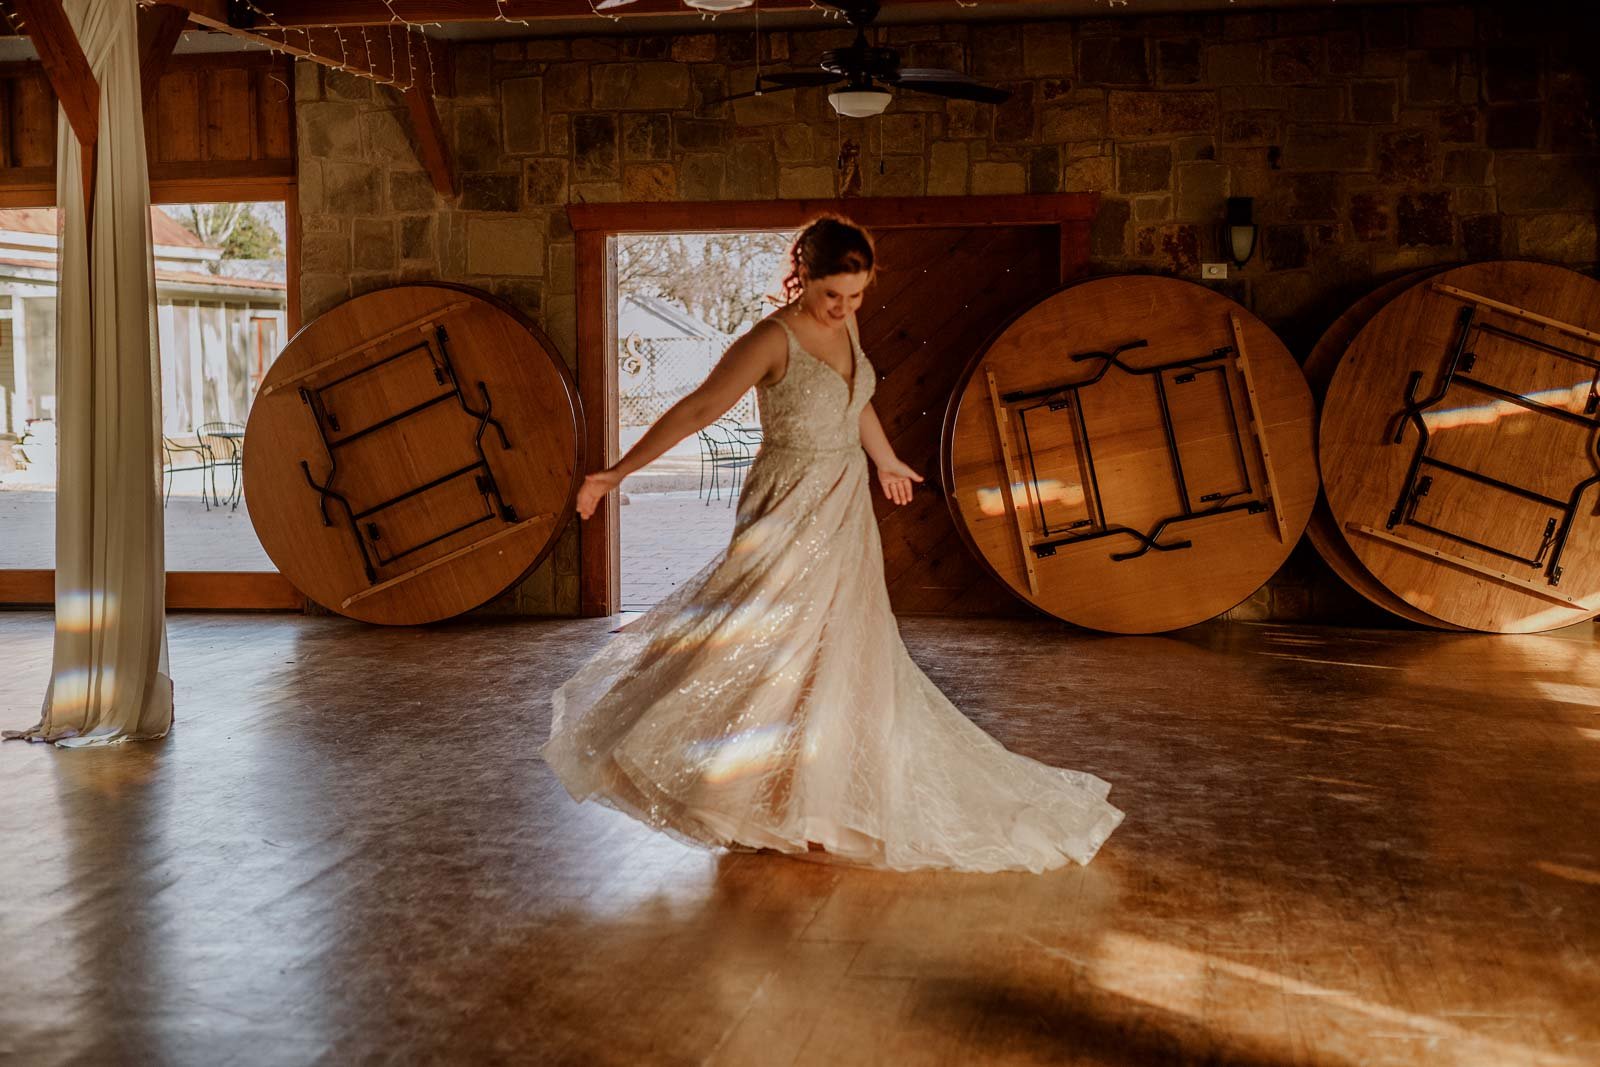 The bride twirls in the center of the frame at Spinellis wedding venue with tables operate in storage position